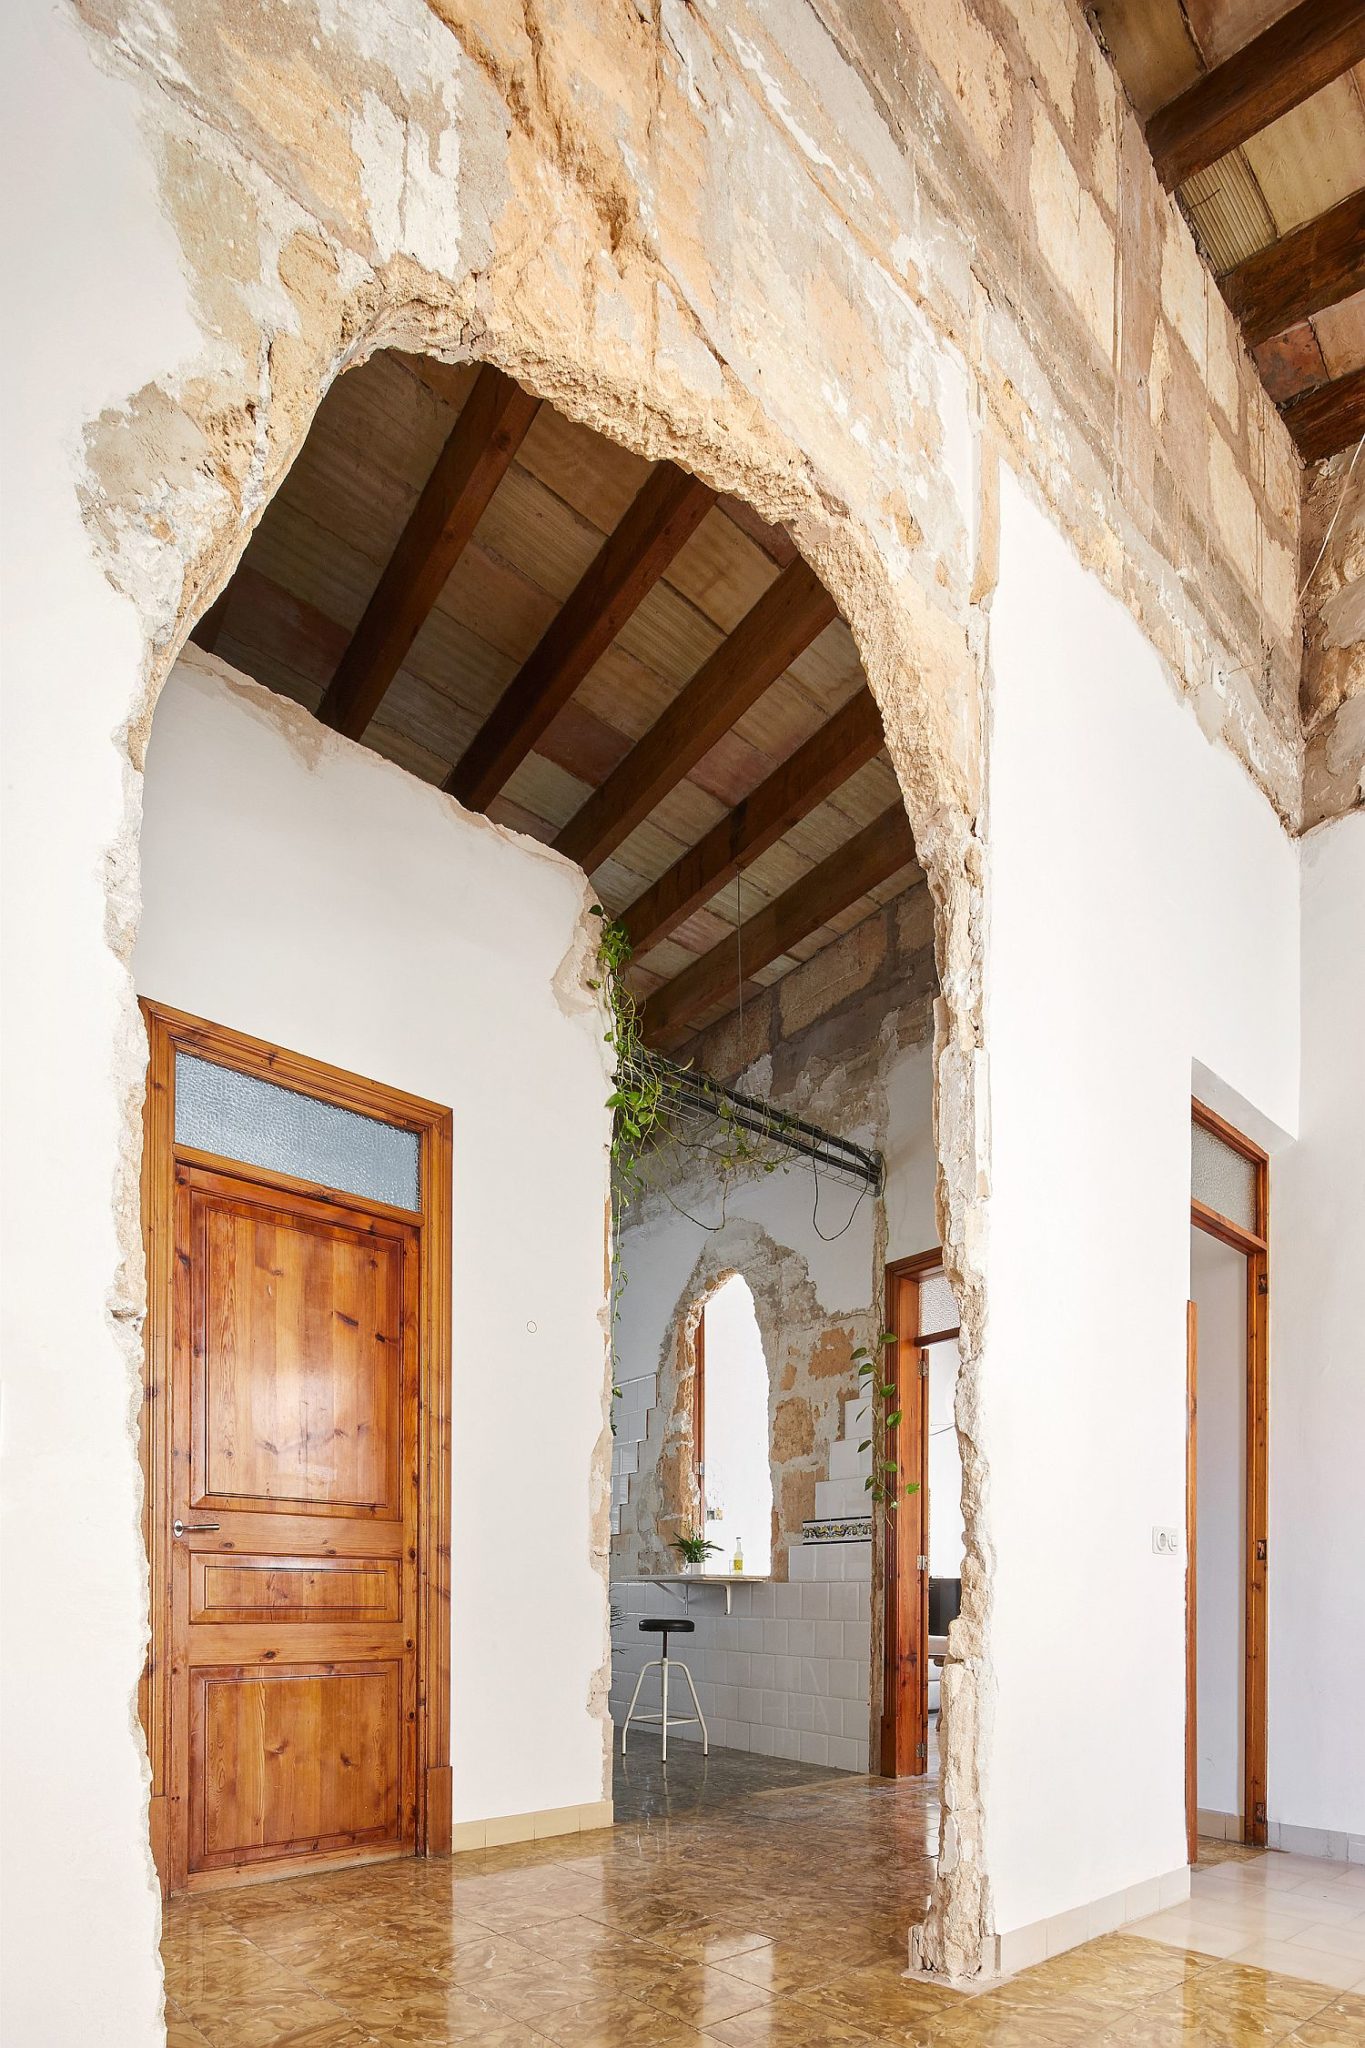 Old archways are left intact and accentuated to create visual contrast